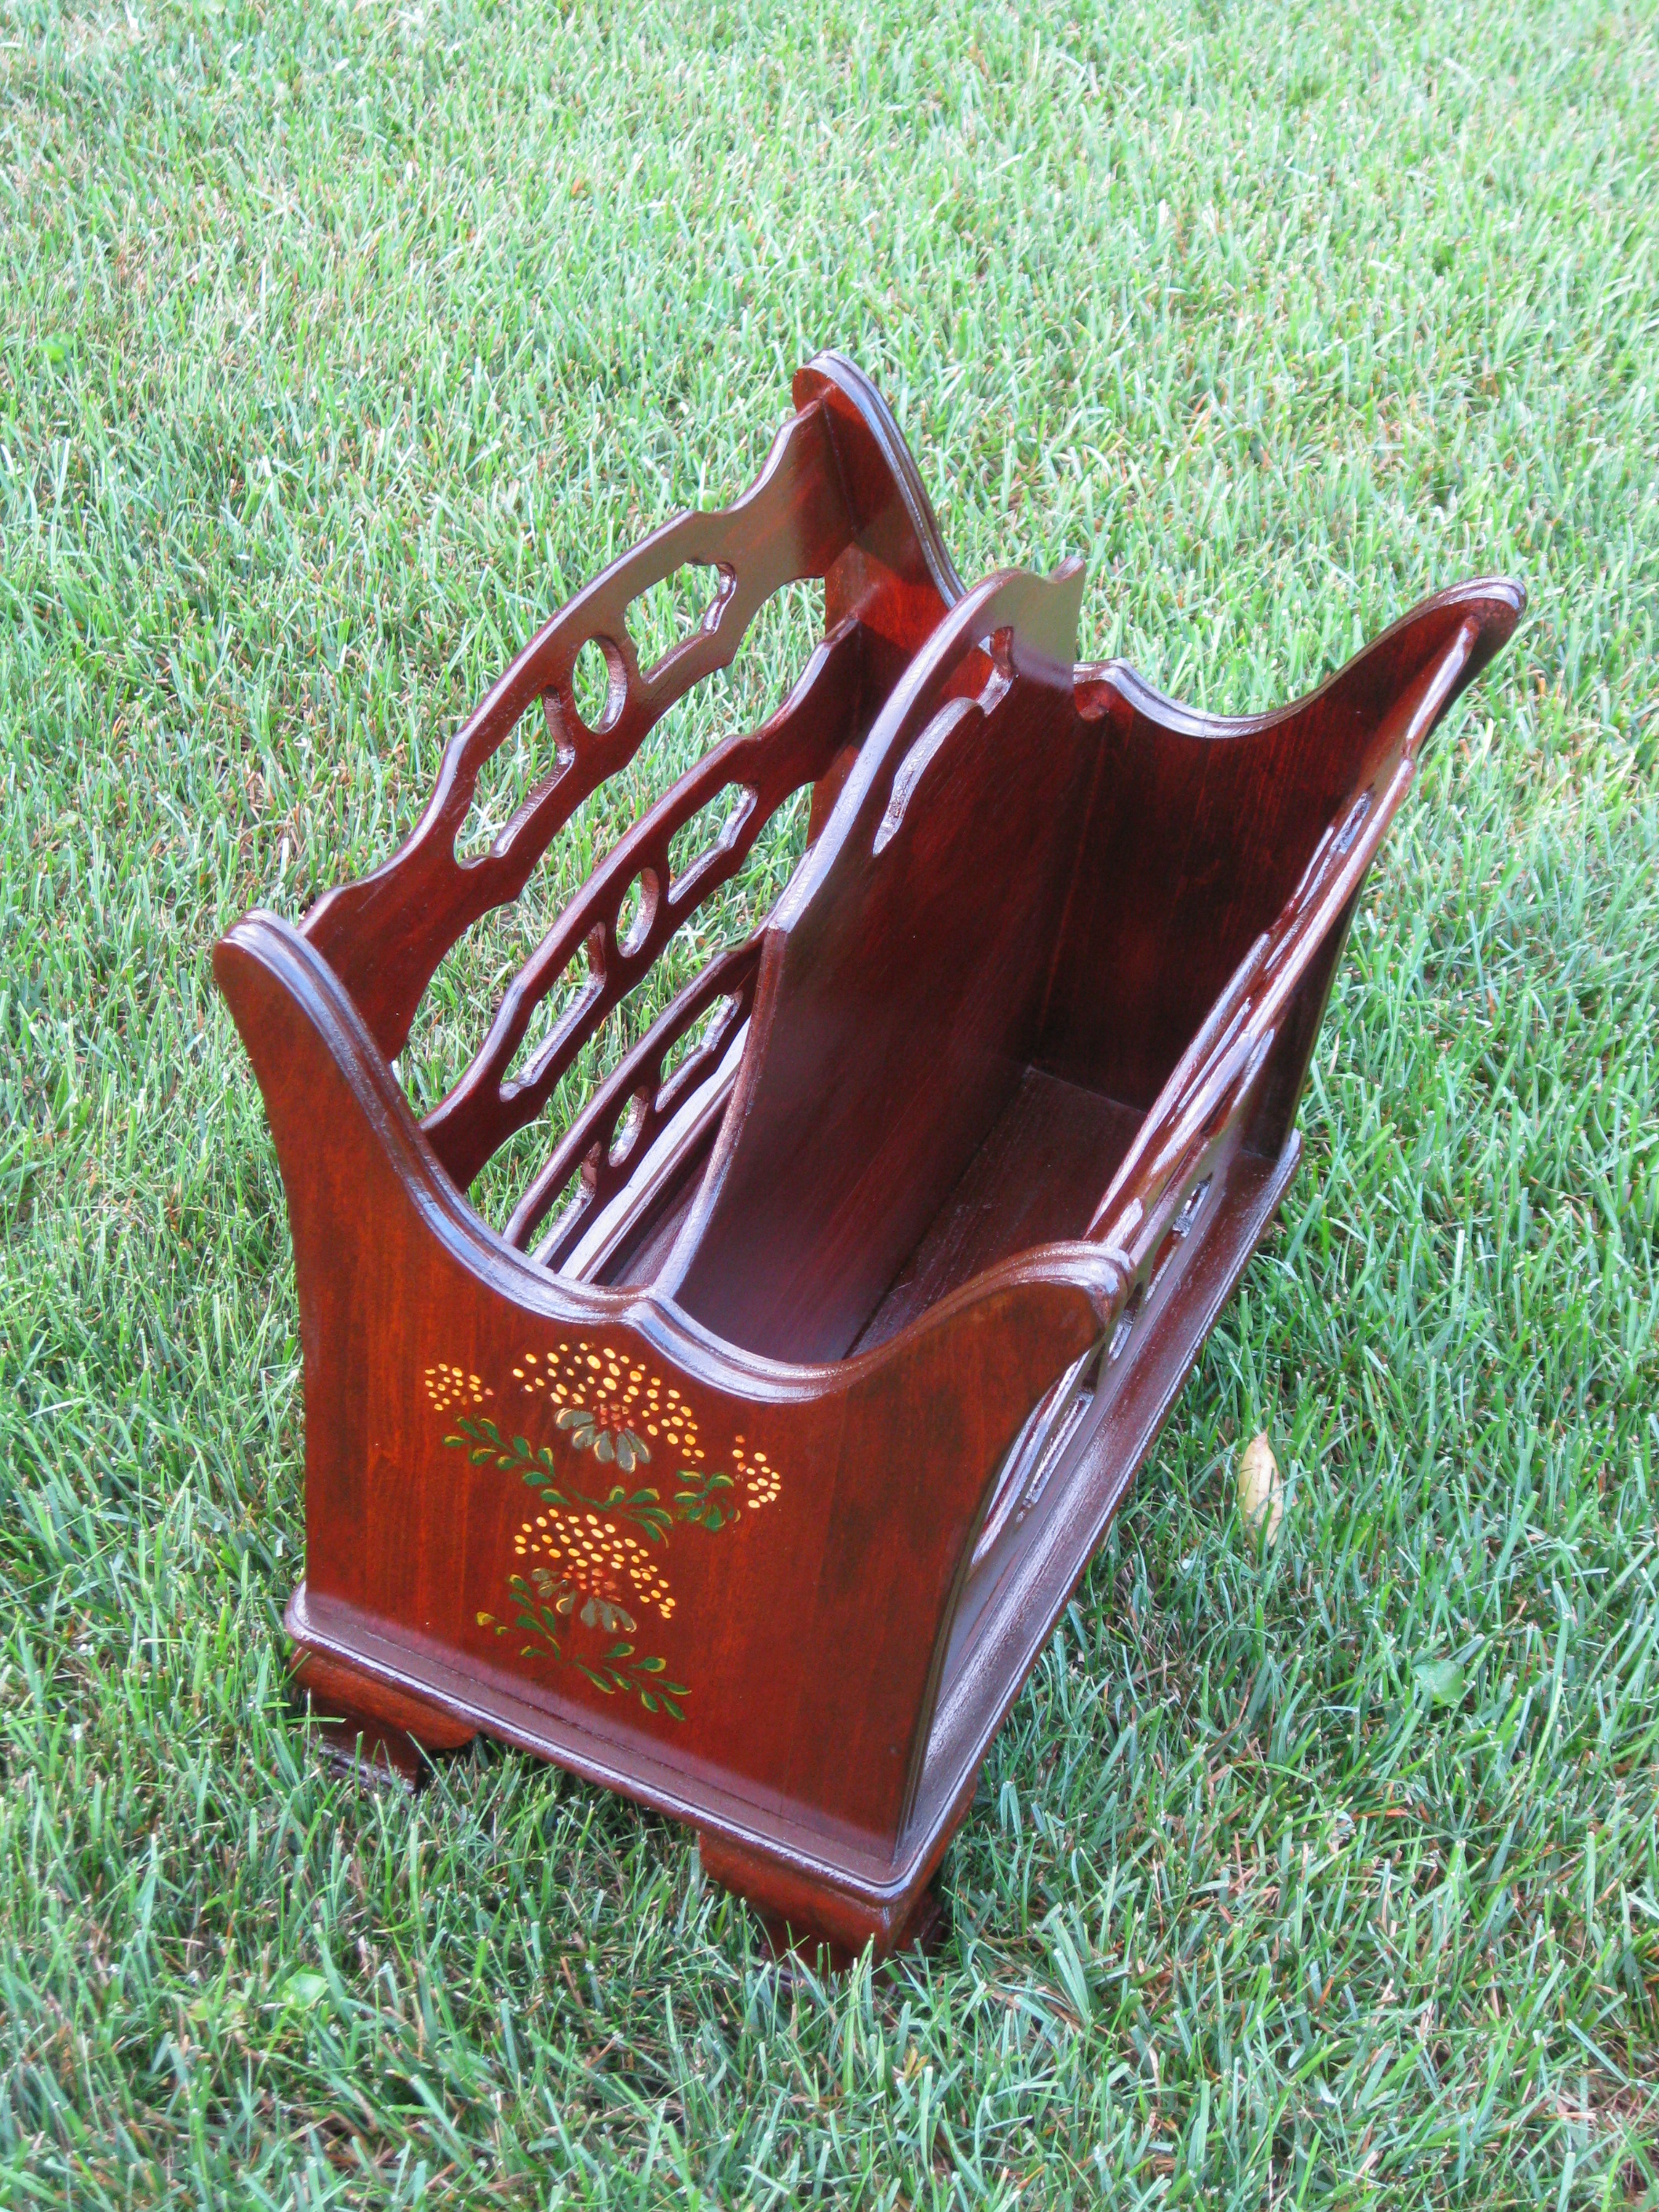 The old magazine rack was cleaned, repainted and varnished